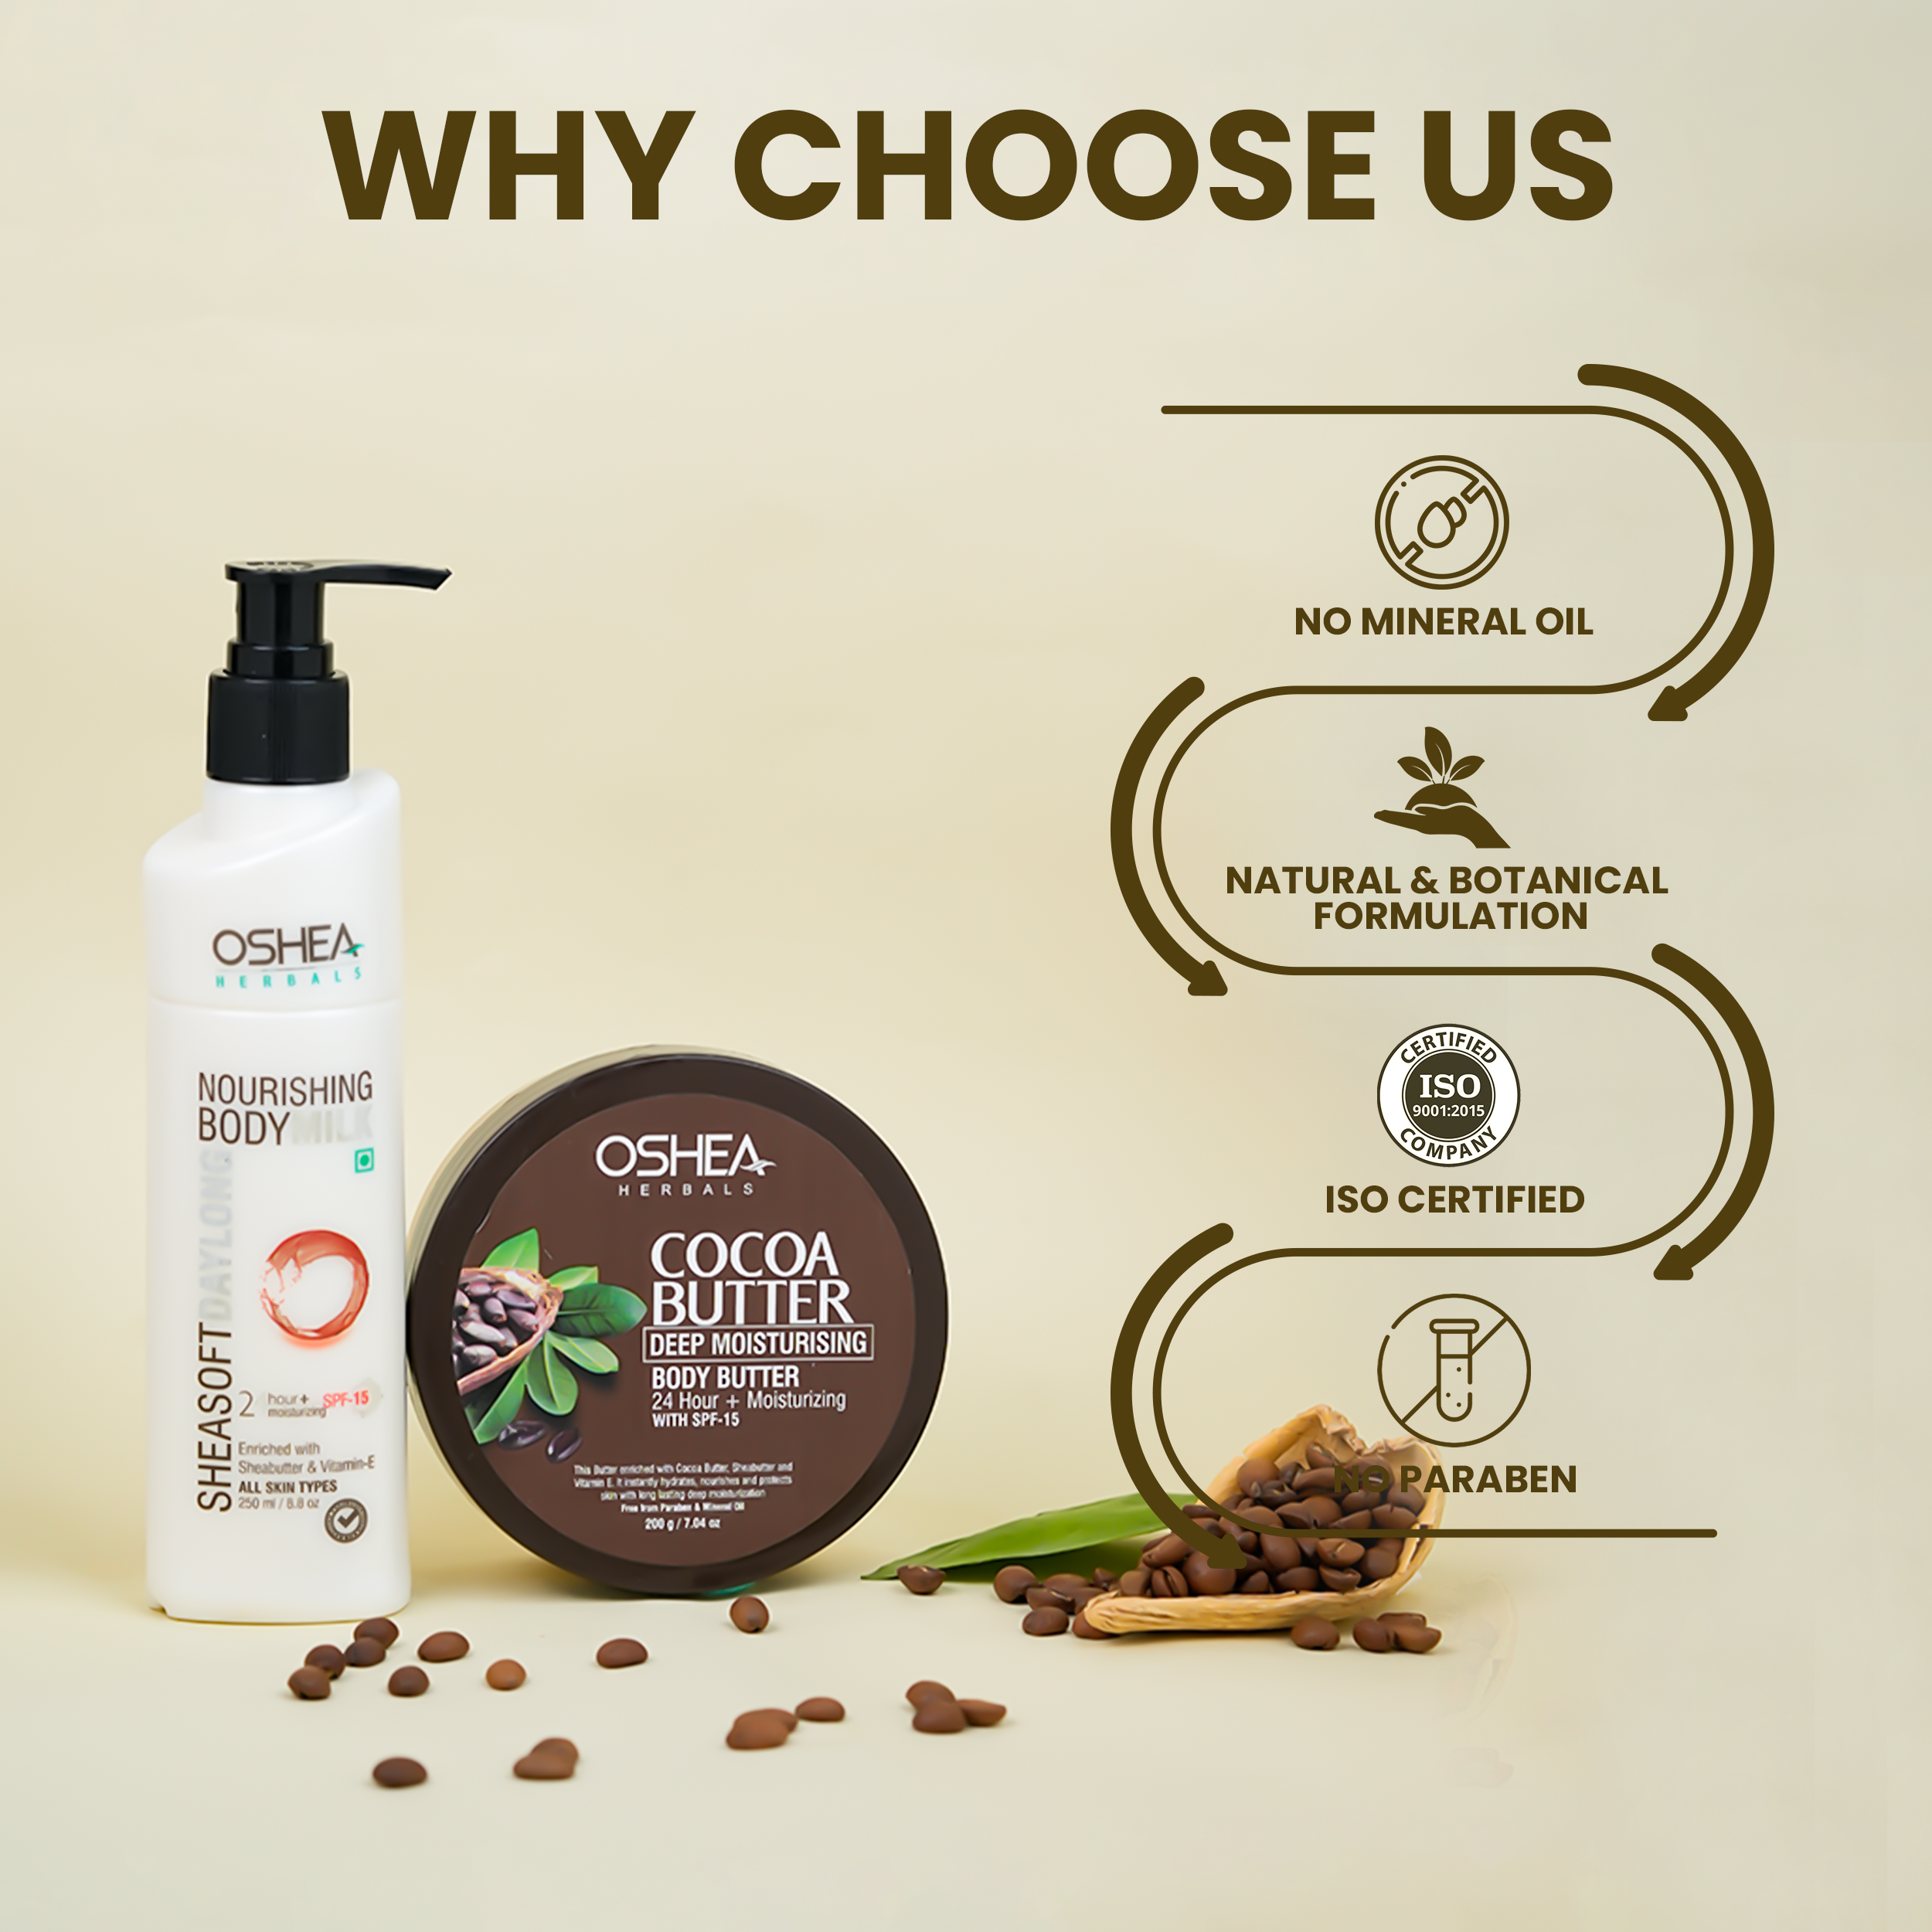 Why Choose Us Cocoa Butter Body Butter Sheasoft Fairness Lotion Combo Oshea Herbals 